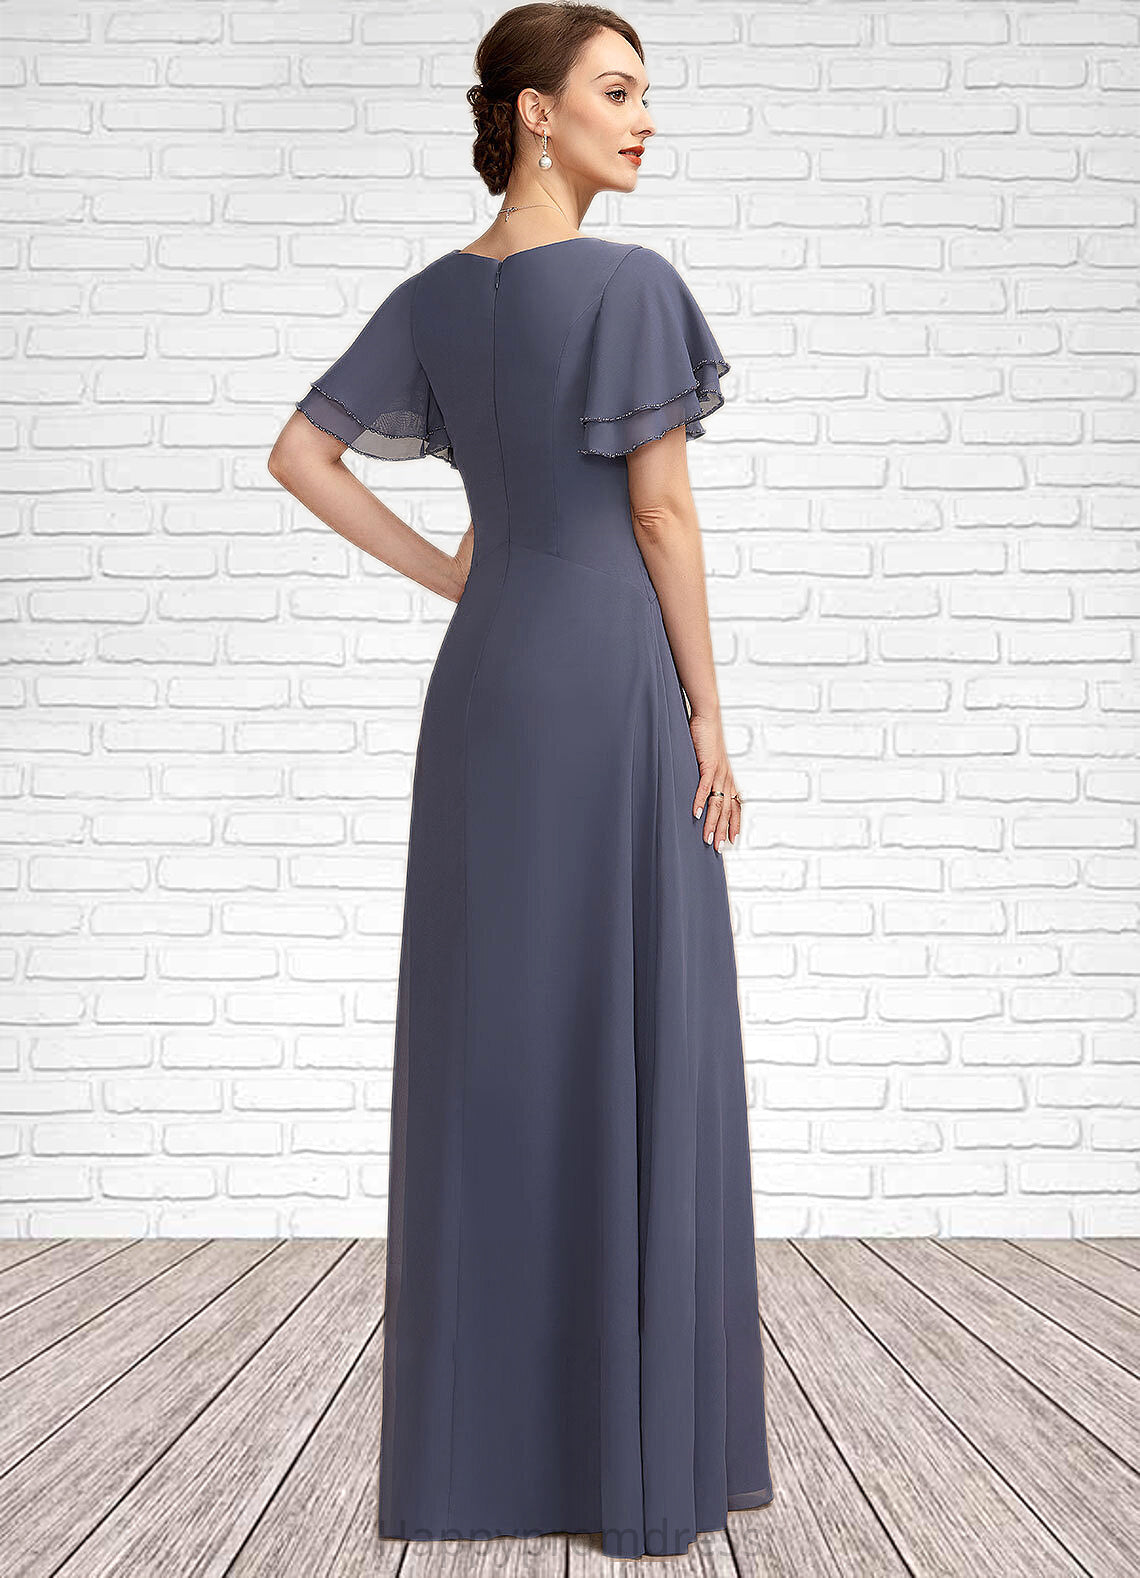 Leah A-Line V-neck Floor-Length Chiffon Mother of the Bride Dress With Ruffle Beading XXS126P0014737